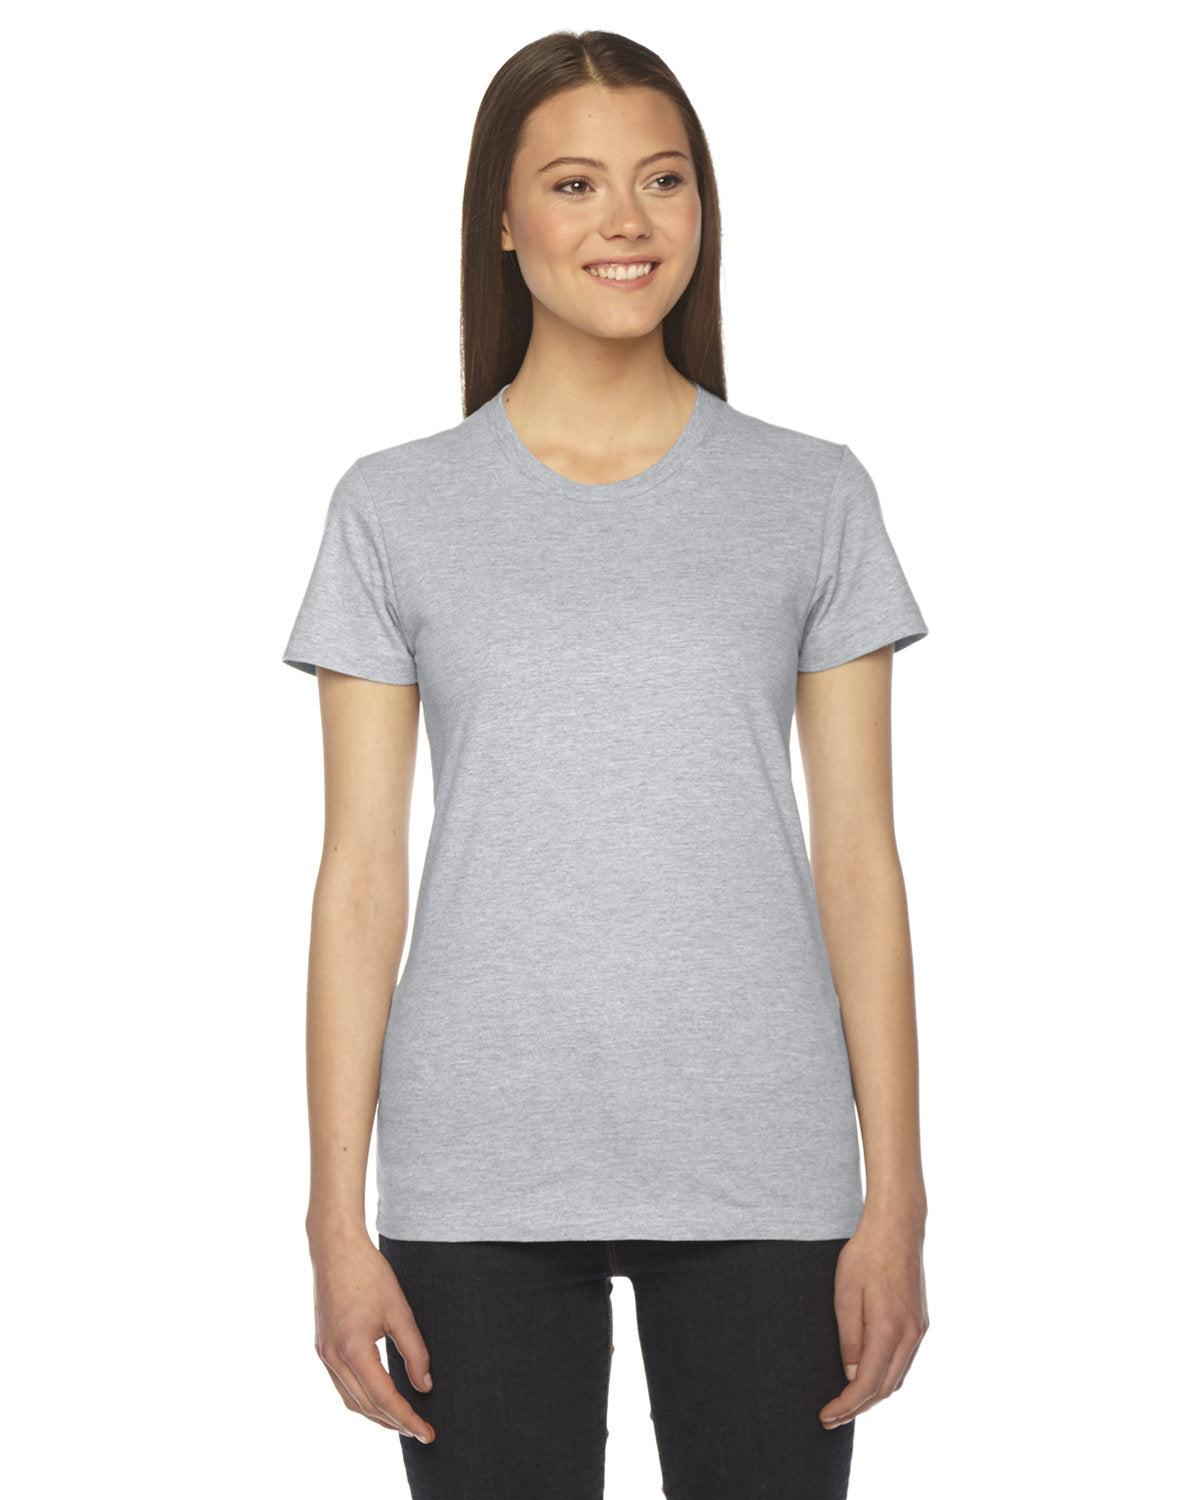 American Apparel Ladies' Fine Jersey USA Made Short-Sleeve T-Shirt: Redefining Style and Comfort, Crafted in the USA